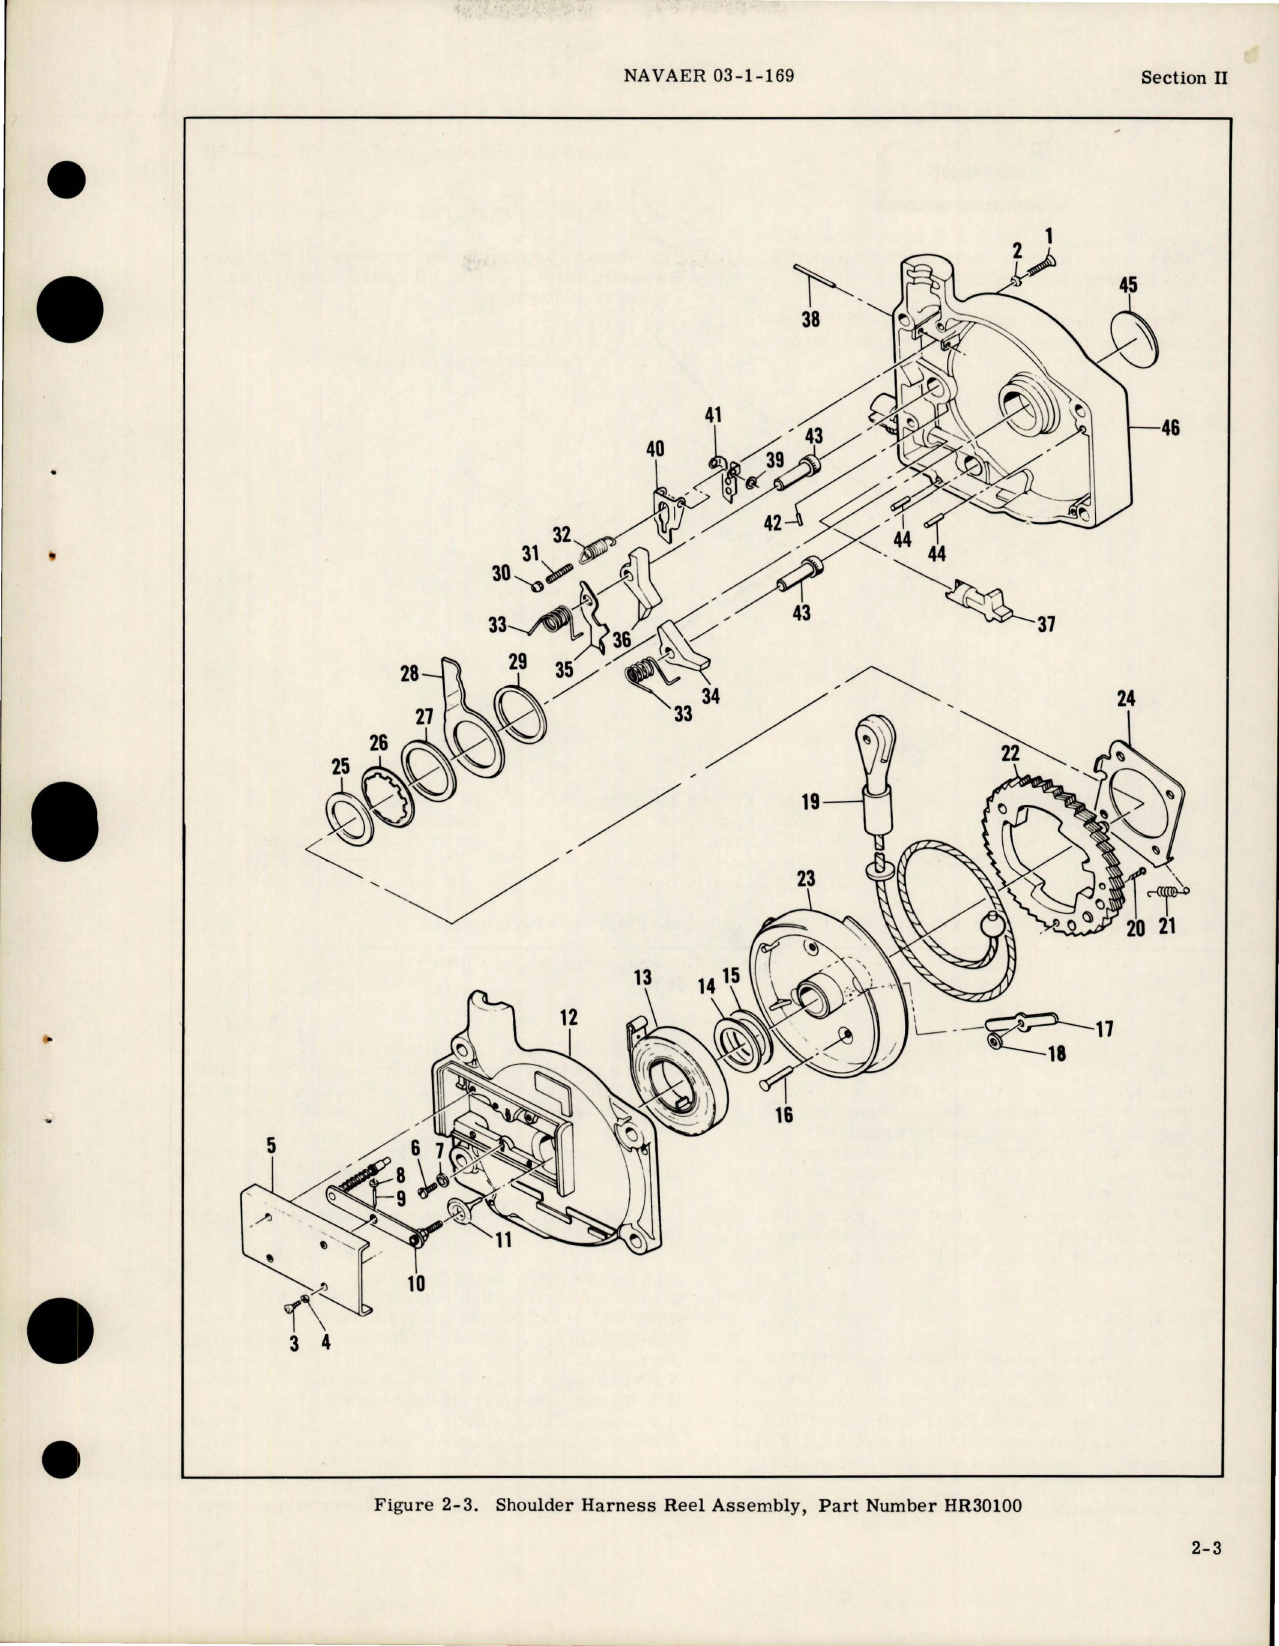 Sample page 9 from AirCorps Library document: Overhaul Instructions for Shoulder Harness Take-Up Reels